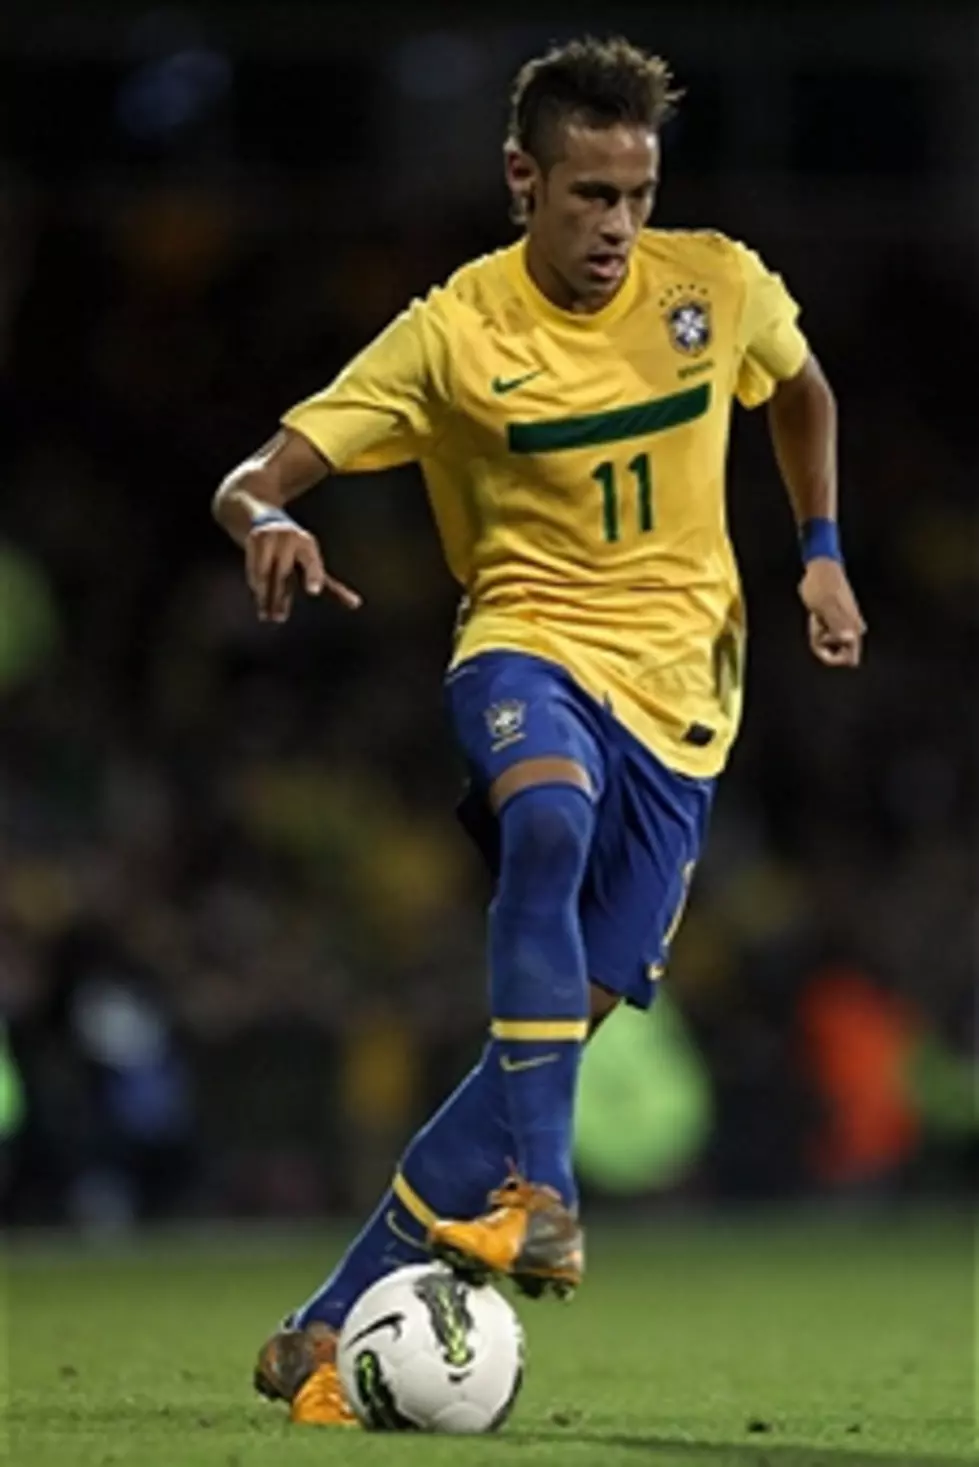 How Much Will Neymar’s Injury Affect Brazil’s Chances at the World Cup?